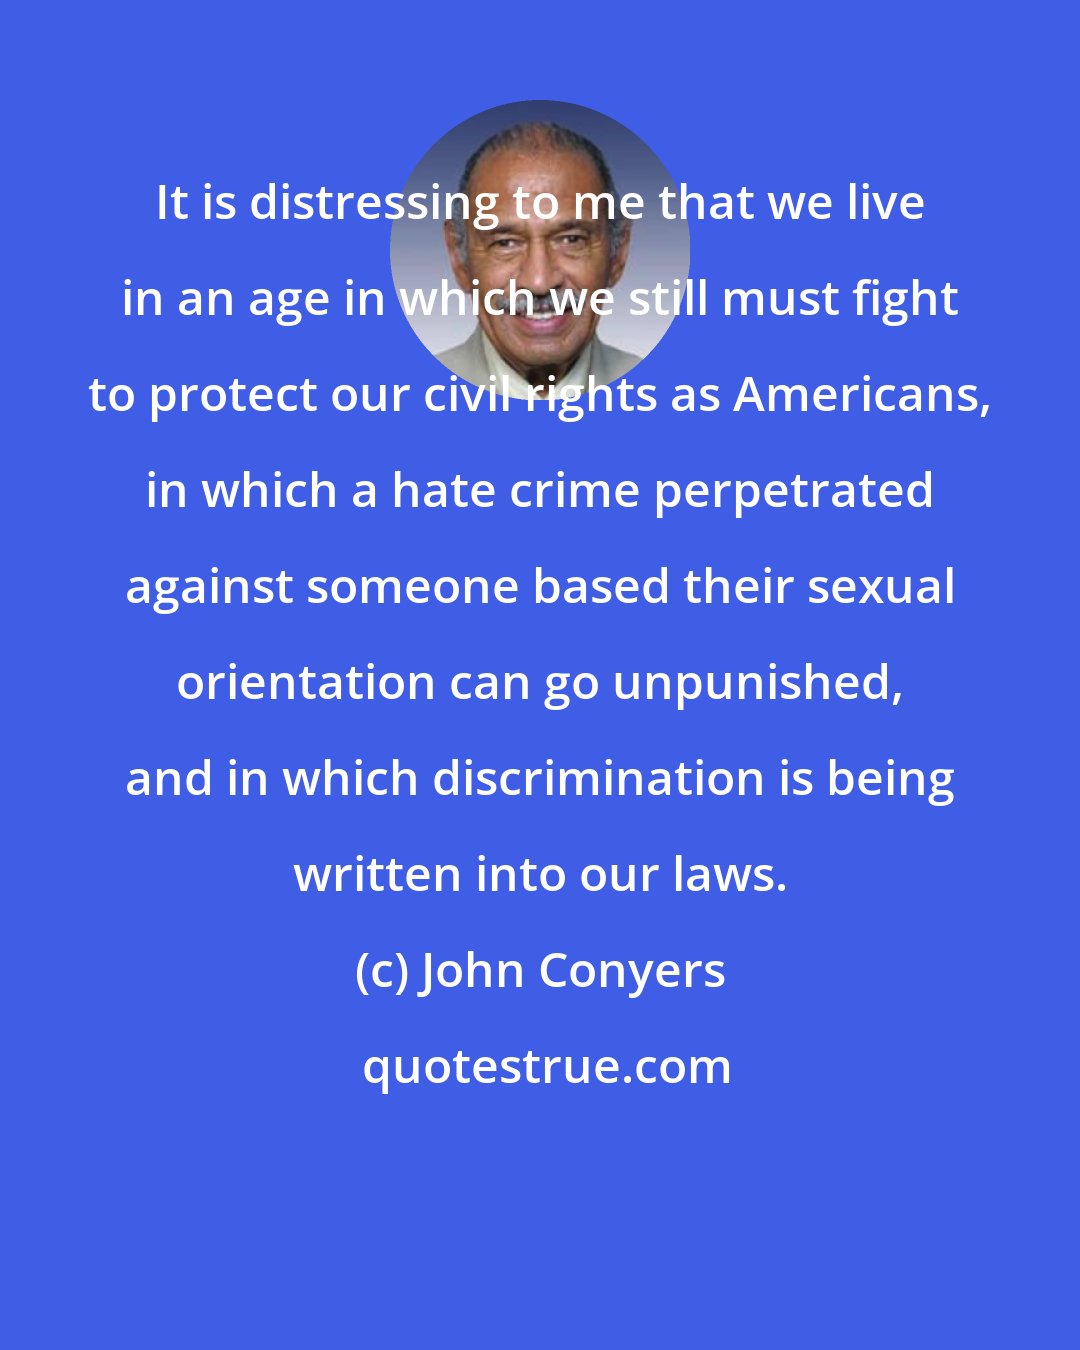 John Conyers: It is distressing to me that we live in an age in which we still must fight to protect our civil rights as Americans, in which a hate crime perpetrated against someone based their sexual orientation can go unpunished, and in which discrimination is being written into our laws.